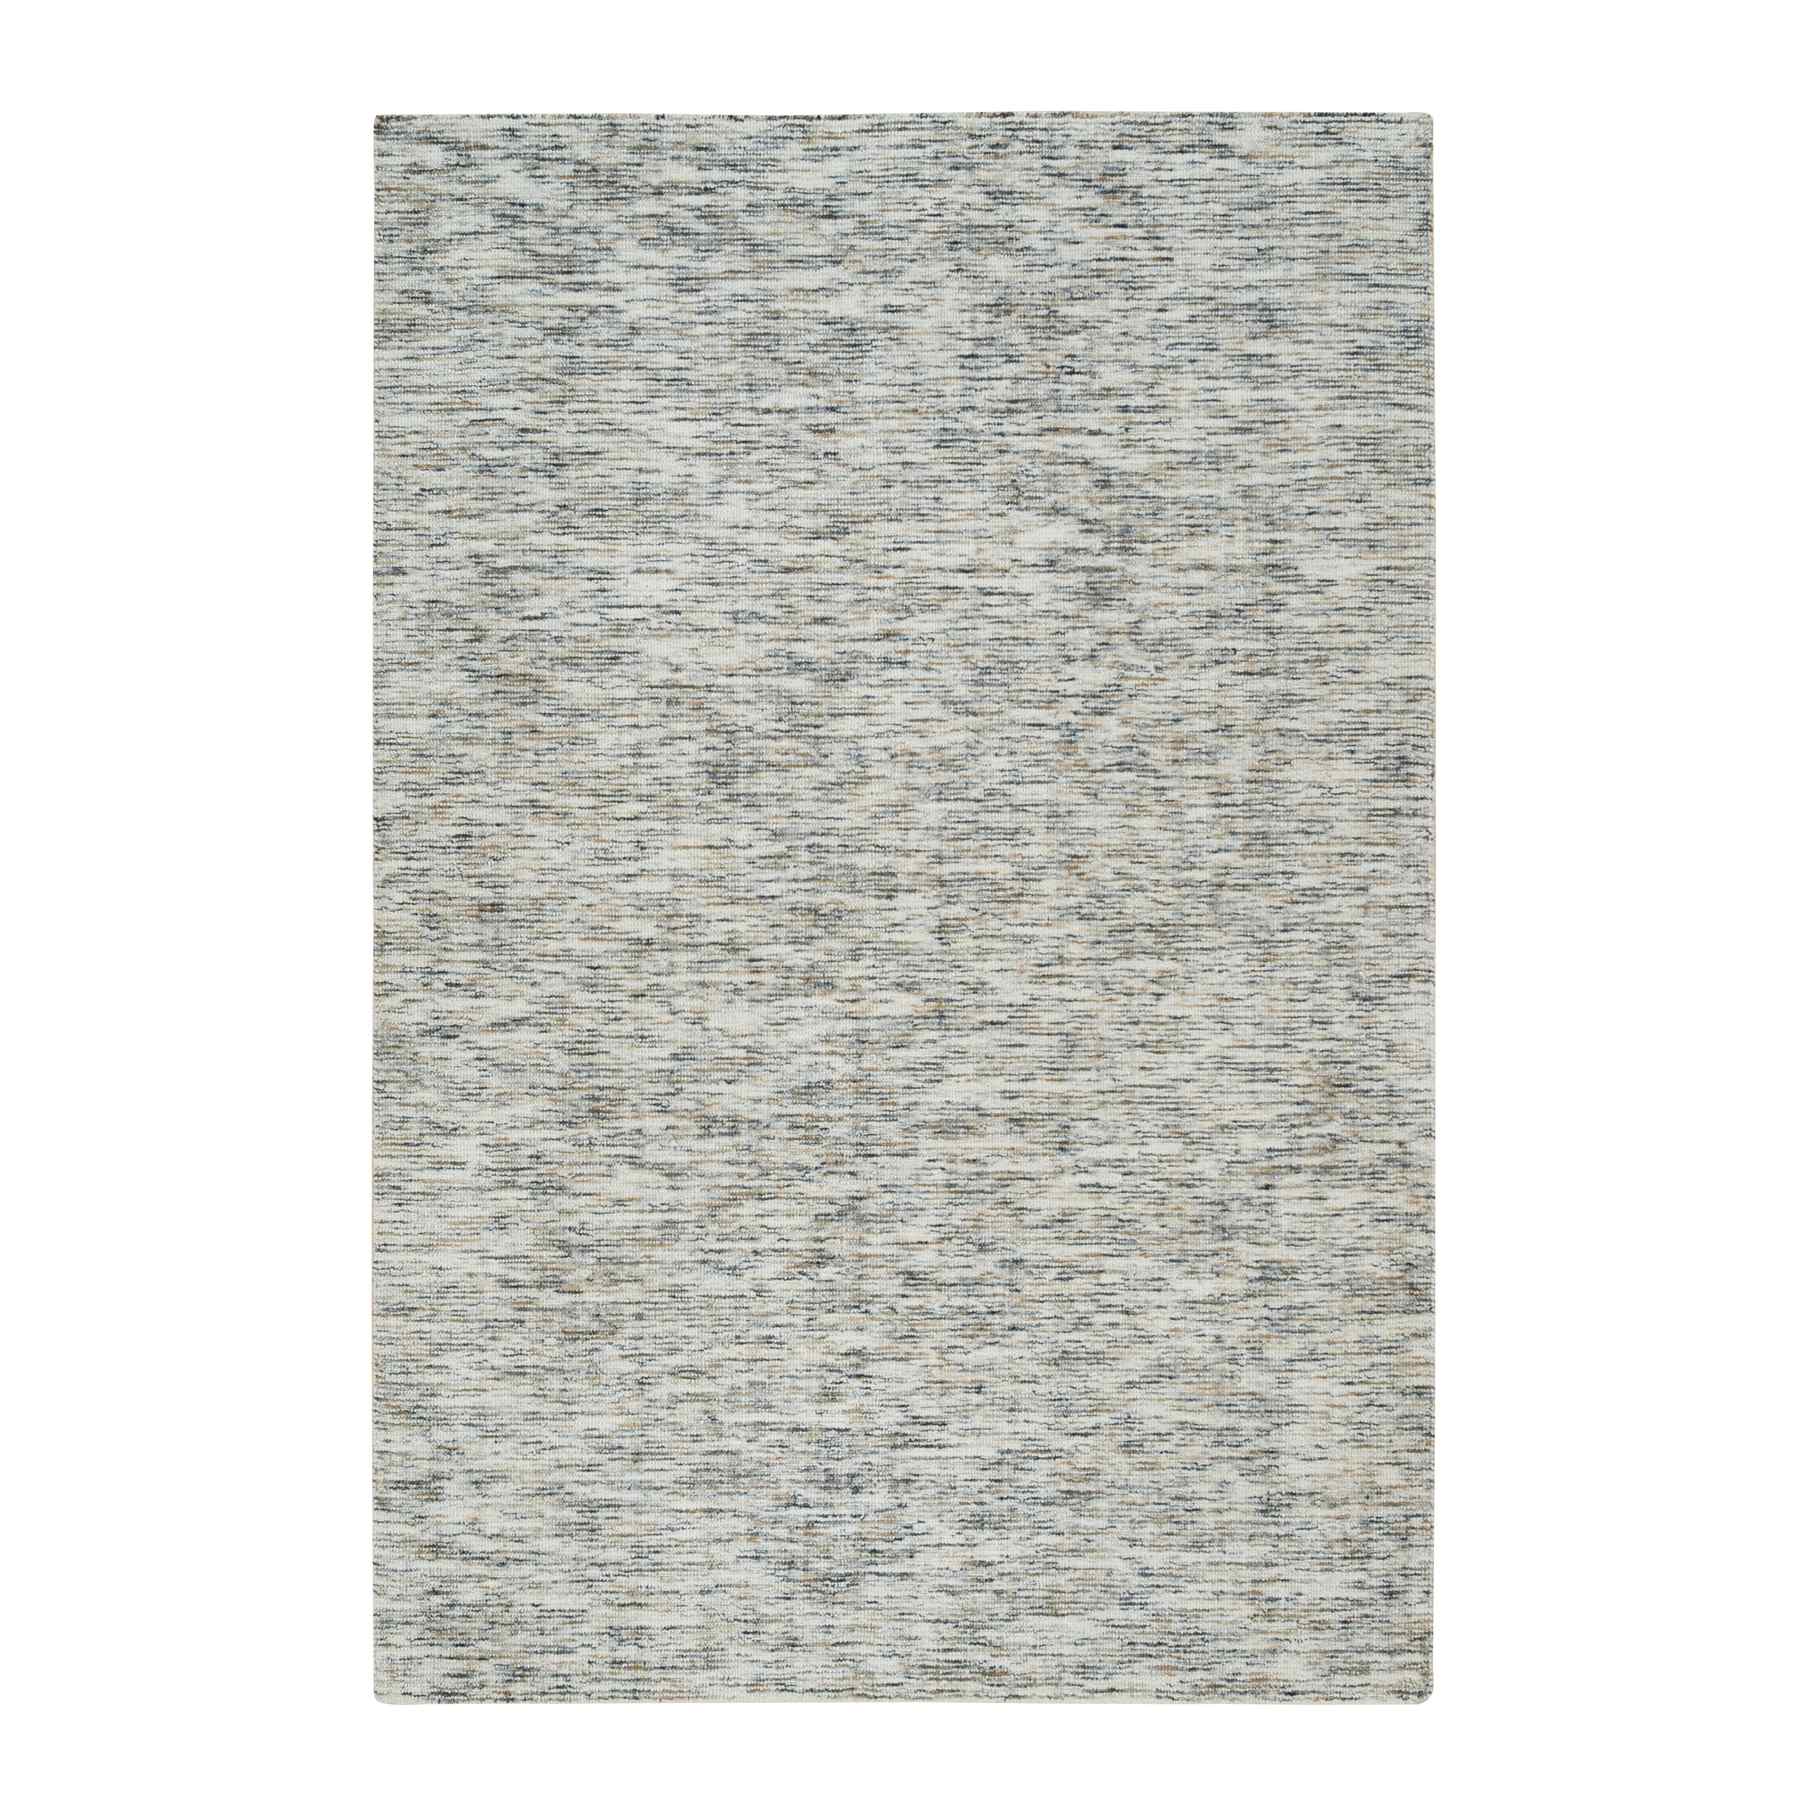 Earth Tone Colors, Hand Loomed Modern Striae Design Soft to the Touch Pure Wool Oriental Rug